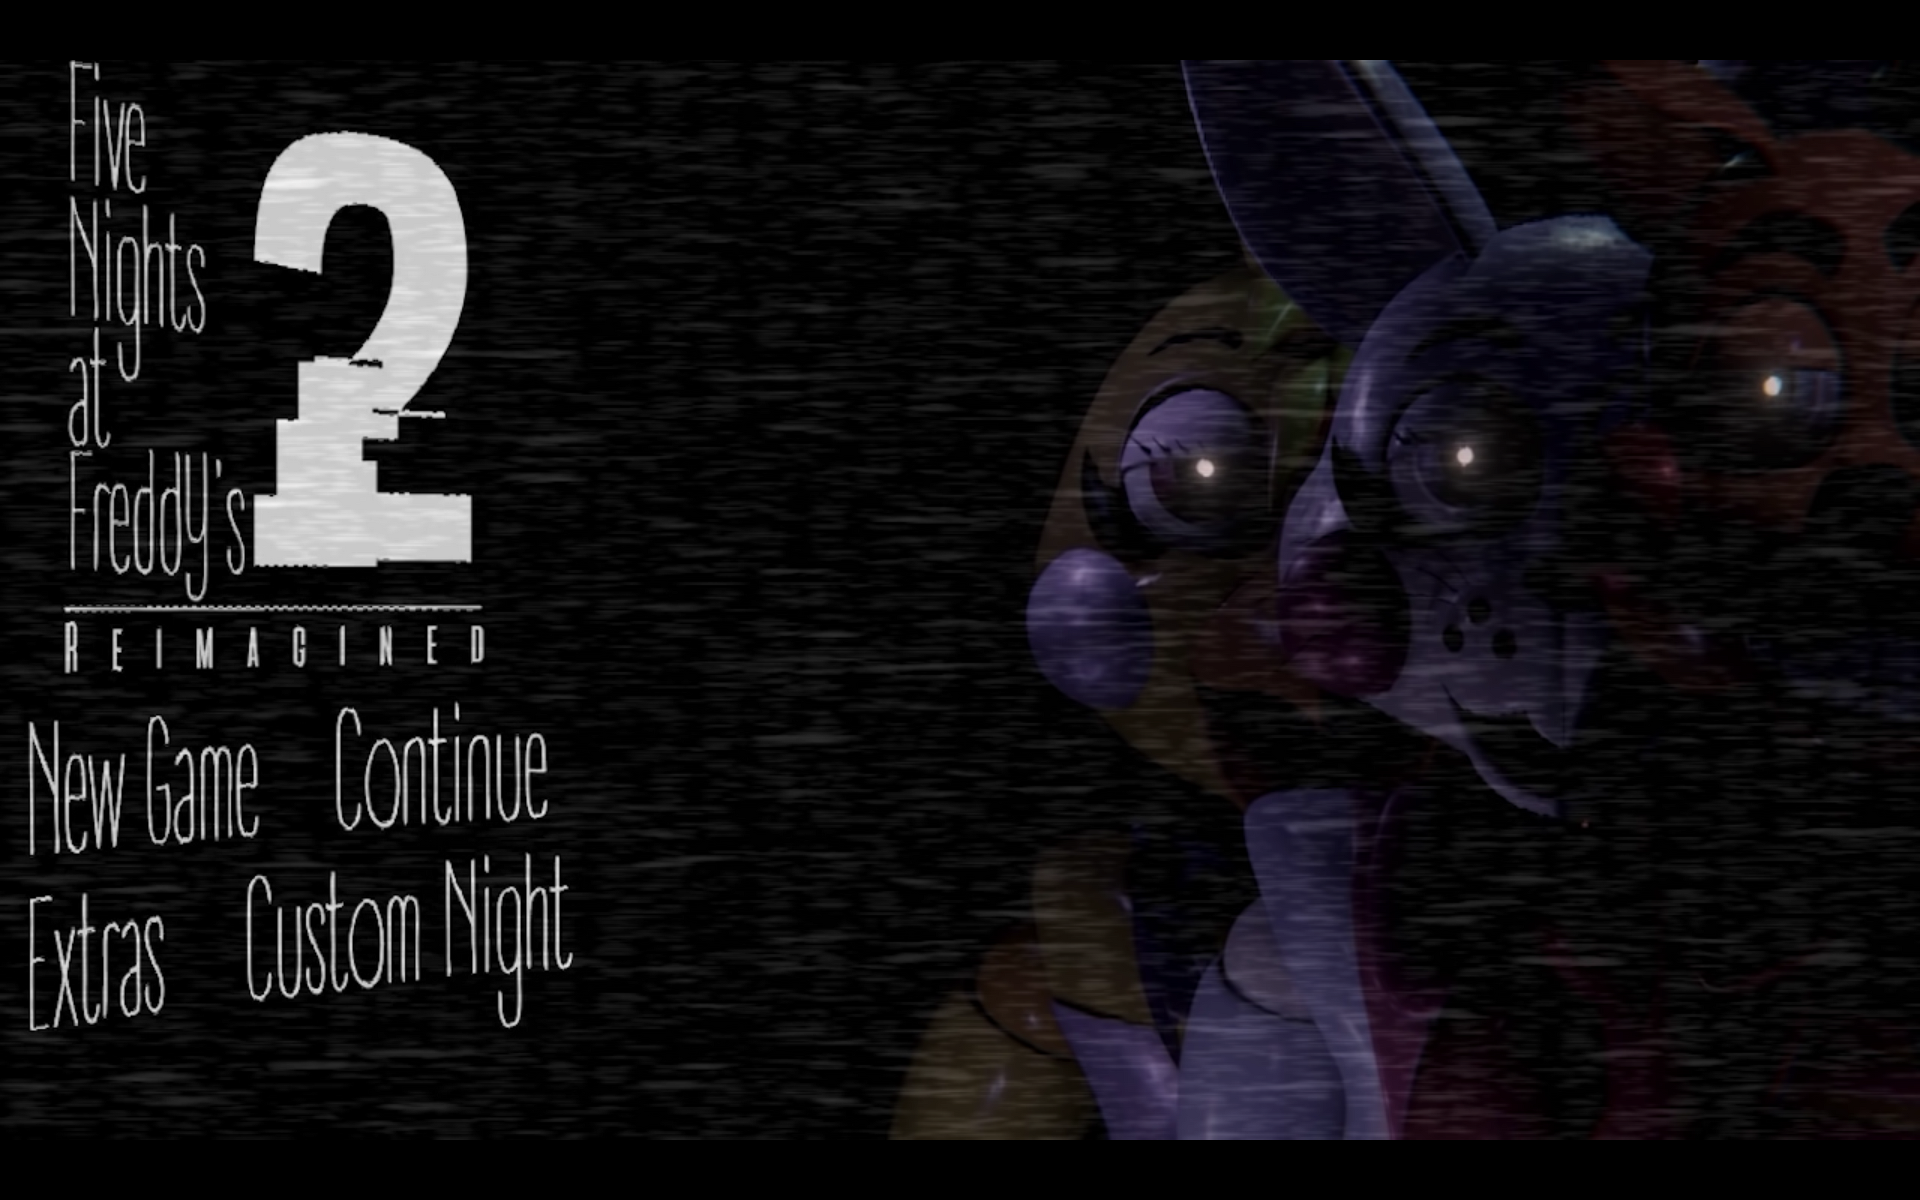 Imagine guys.. that we get a second movie or fnaf2 movie as he